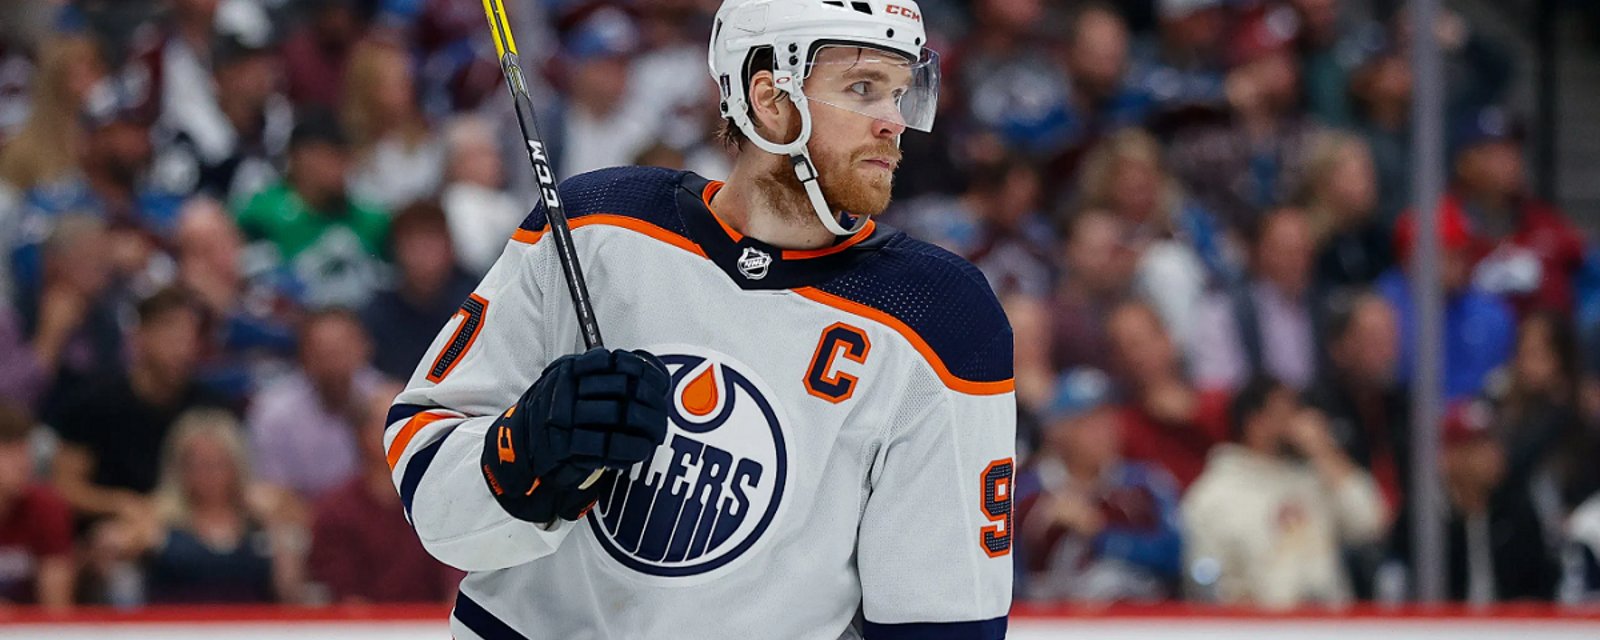 Sean Avery calls out Connor McDavid and the Oilers.